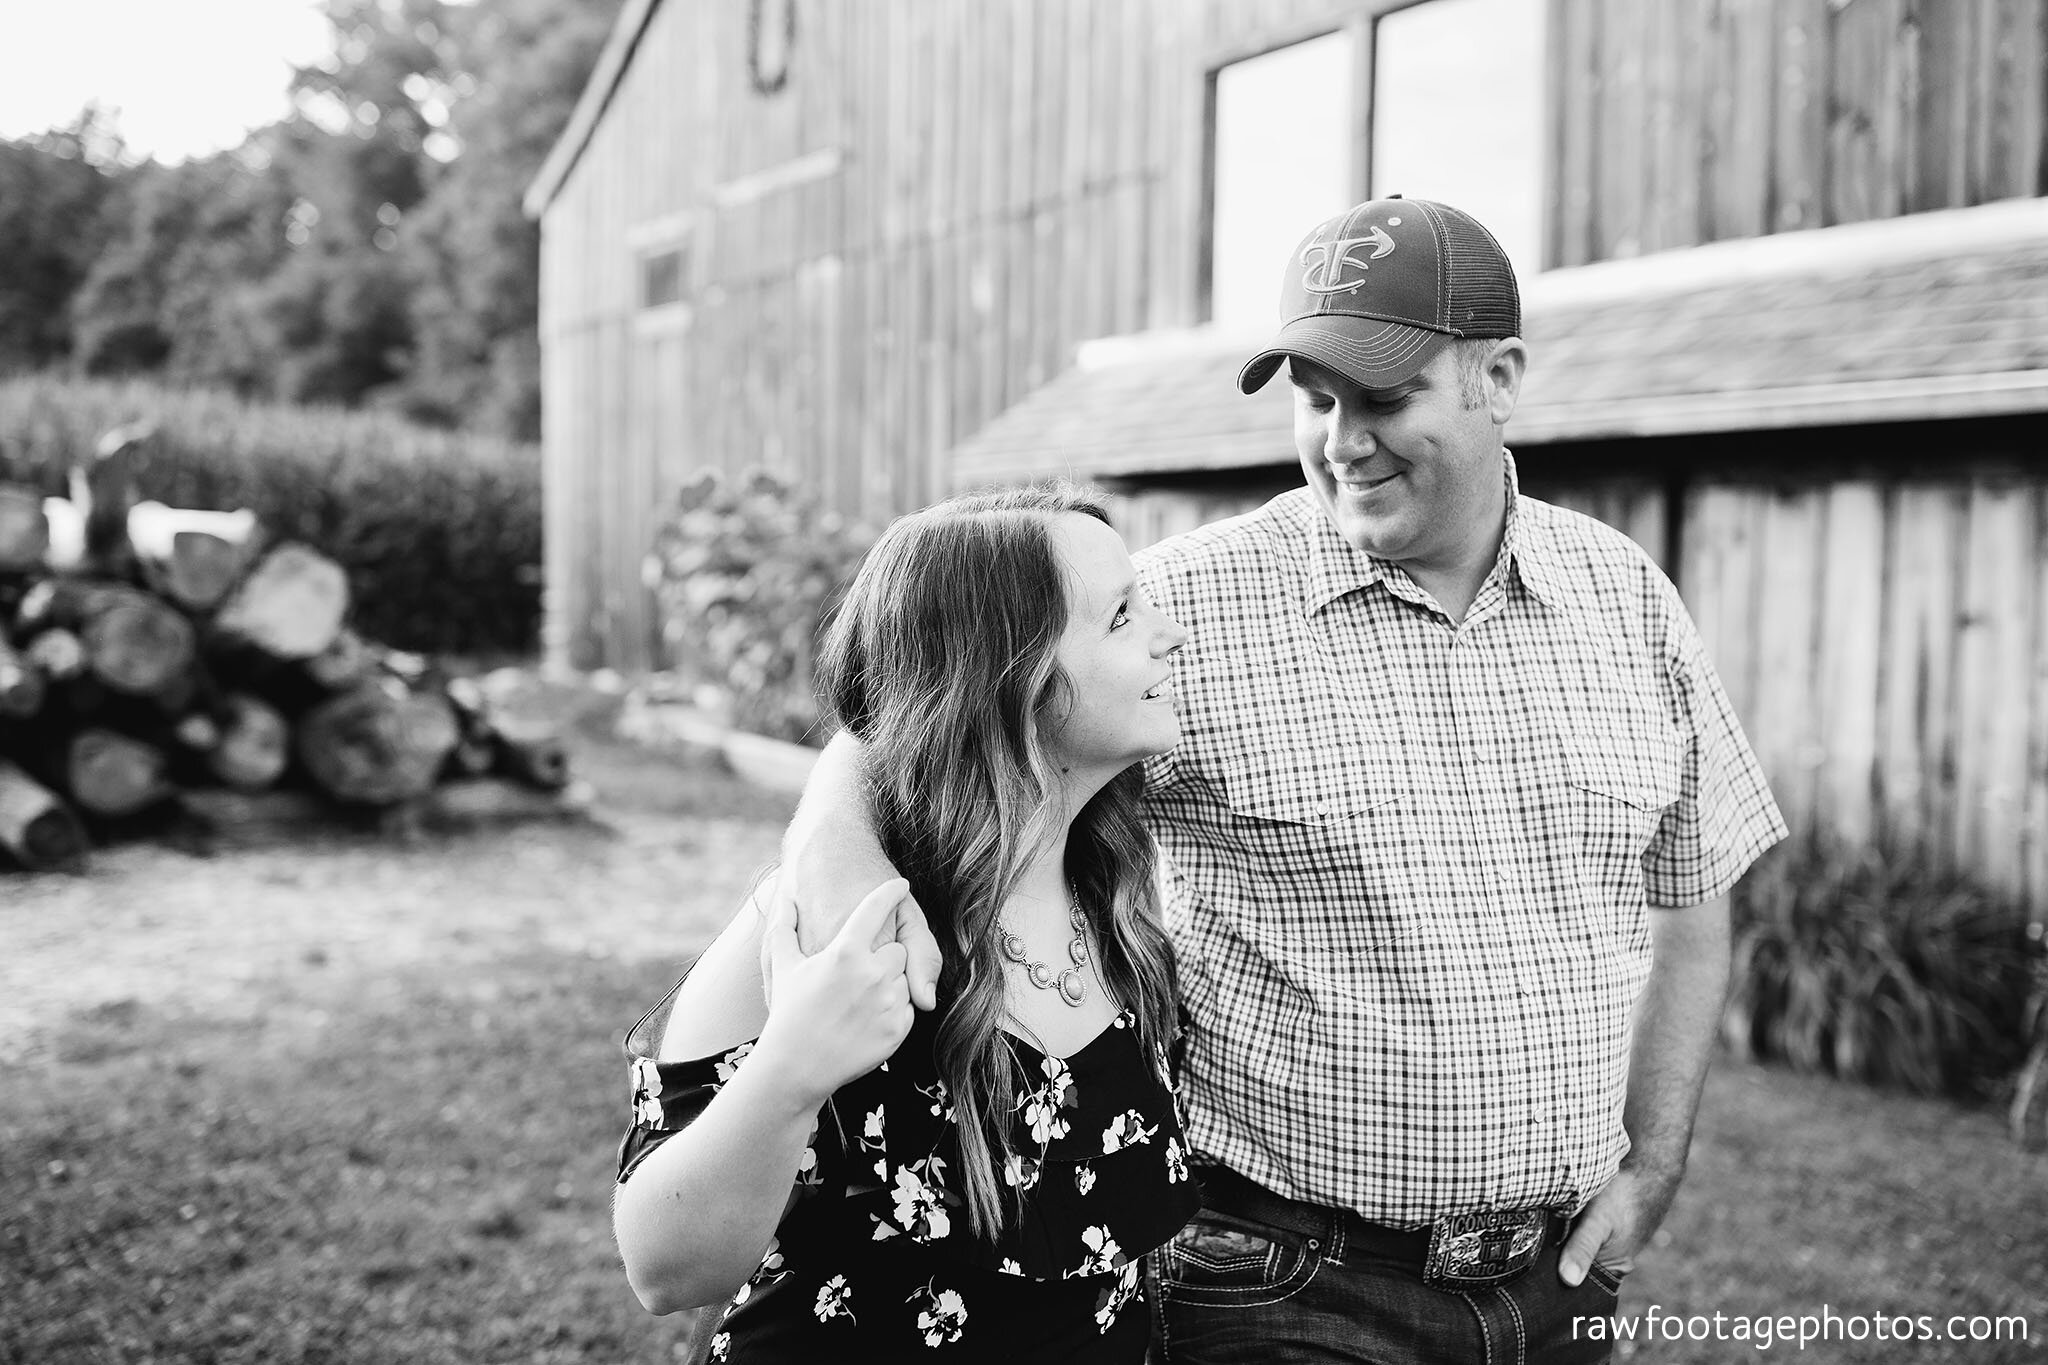 london_ontario_wedding_photographer-engagement_session-farm_engagement-country_e_session-raw_footage_photography-corn_field-011.jpg